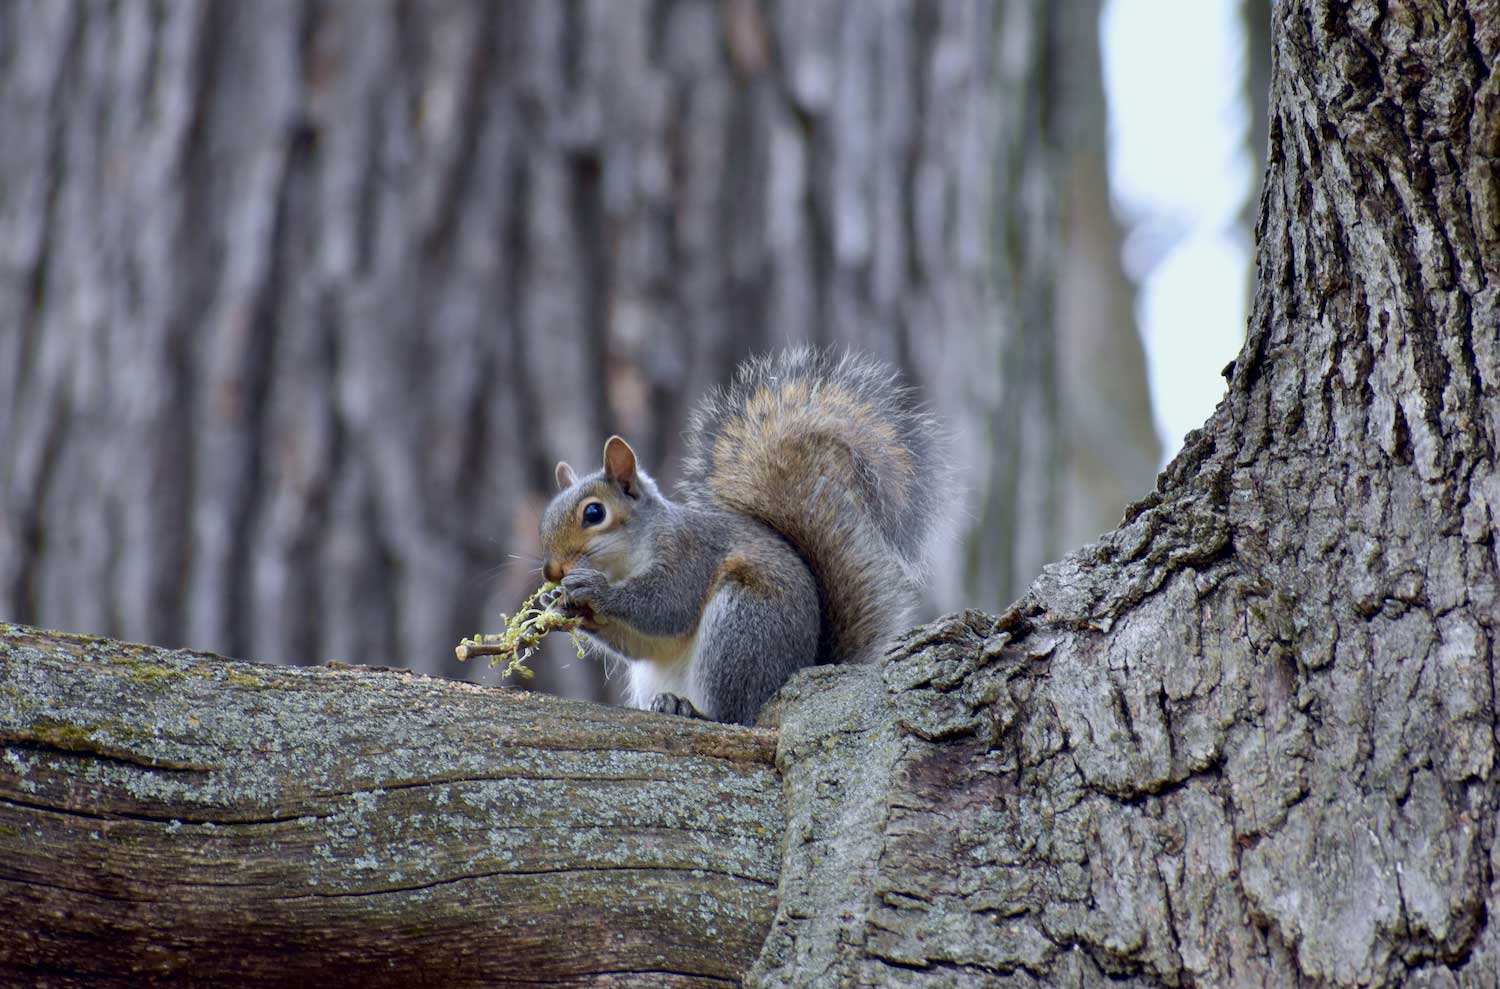 A squirrel eating in a tree